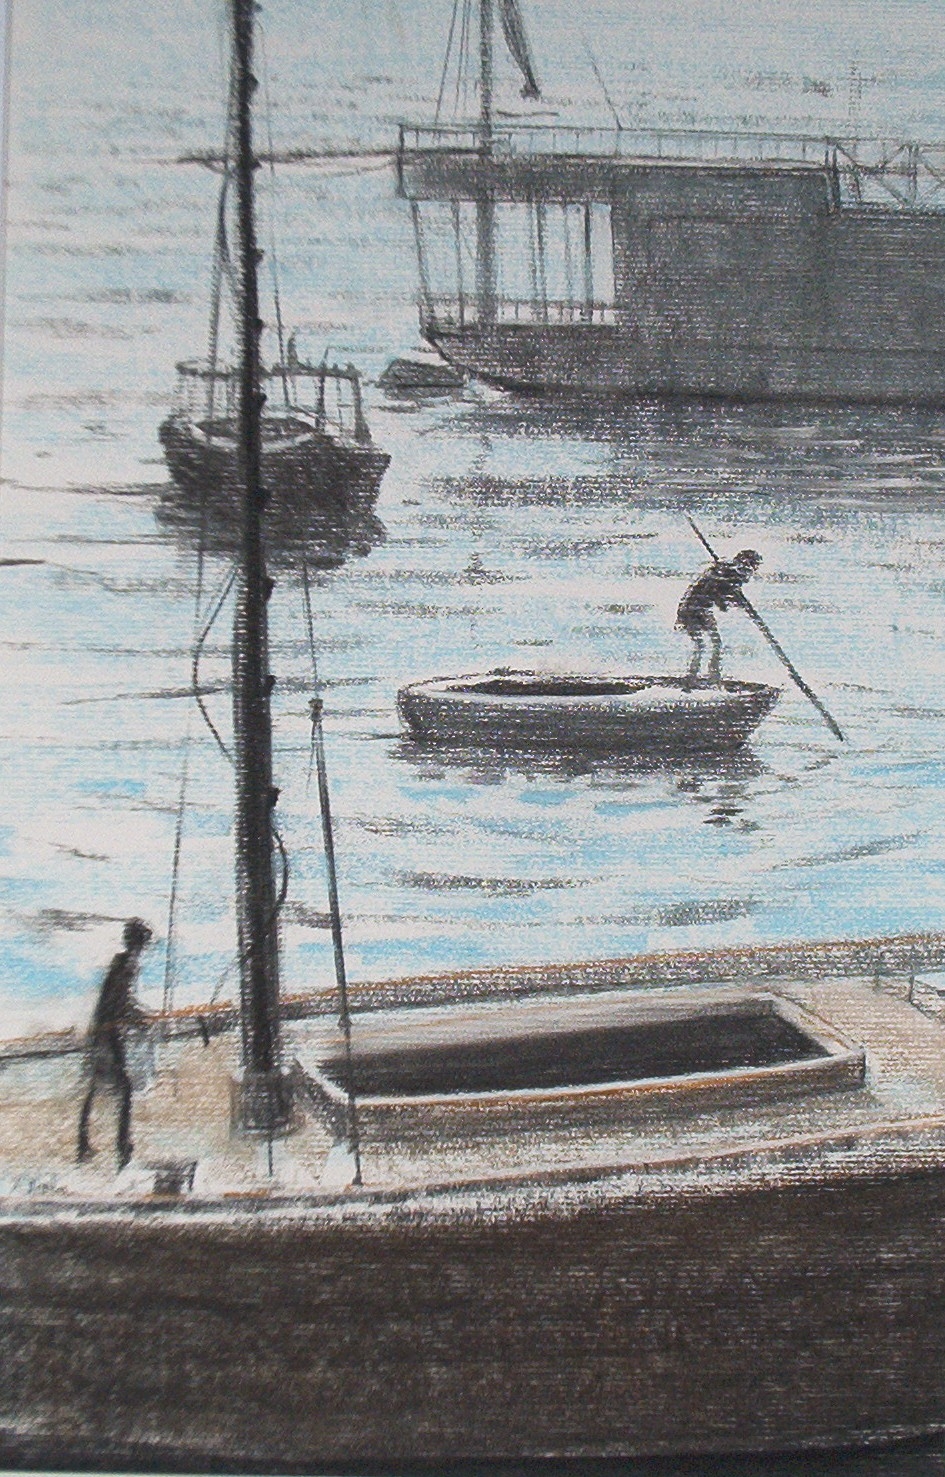 Pastel drawing of Nile houseboat